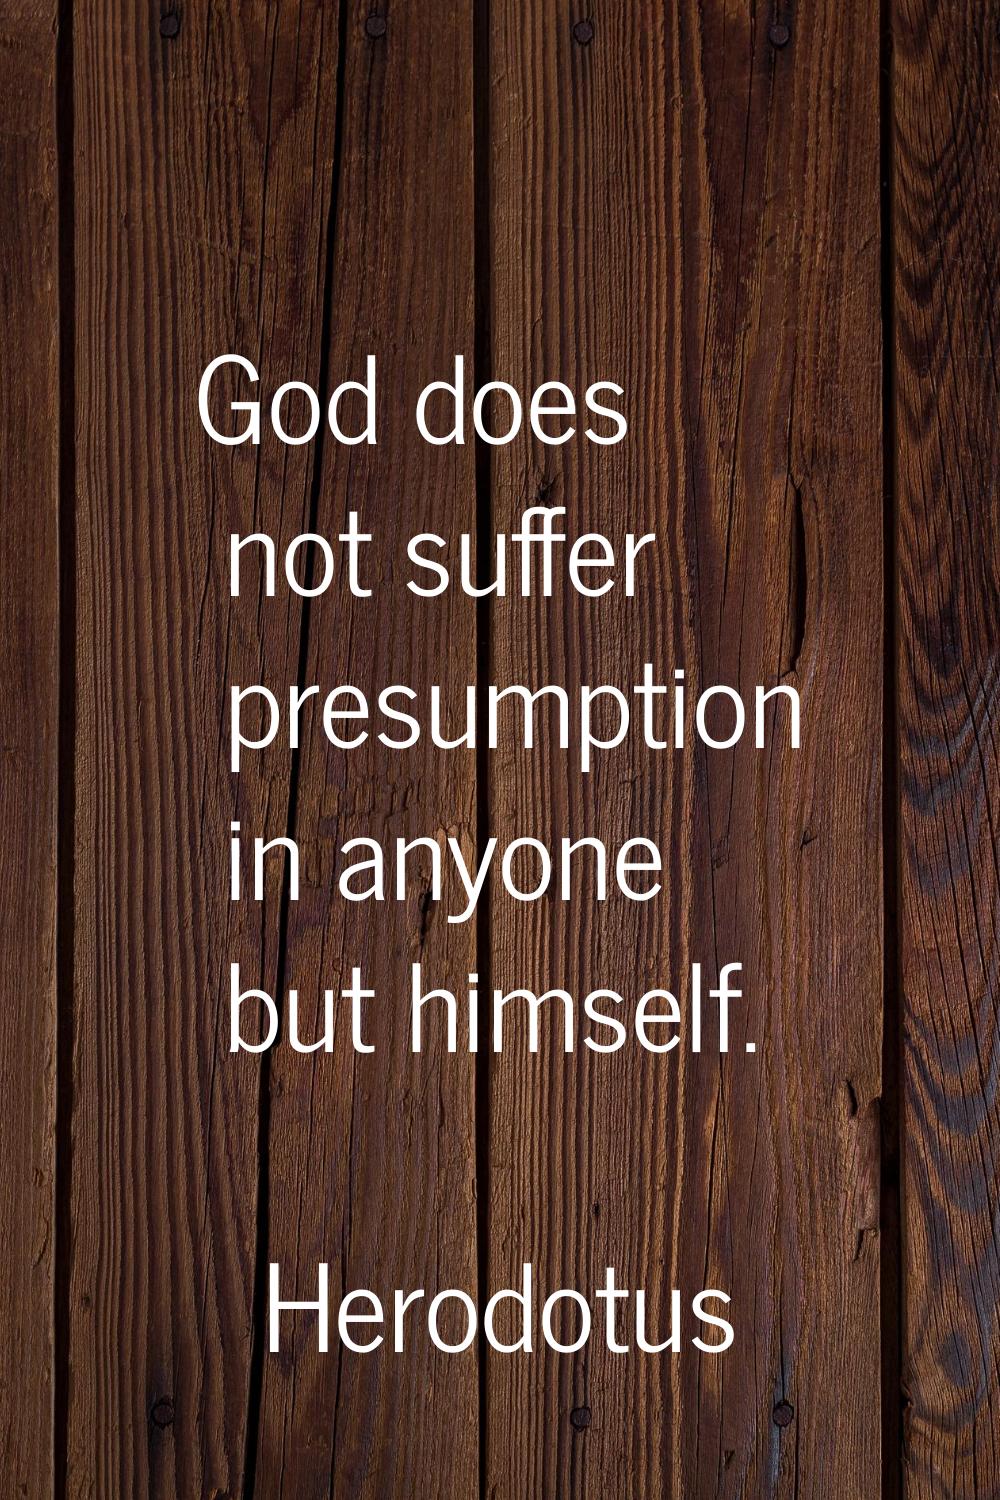 God does not suffer presumption in anyone but himself.